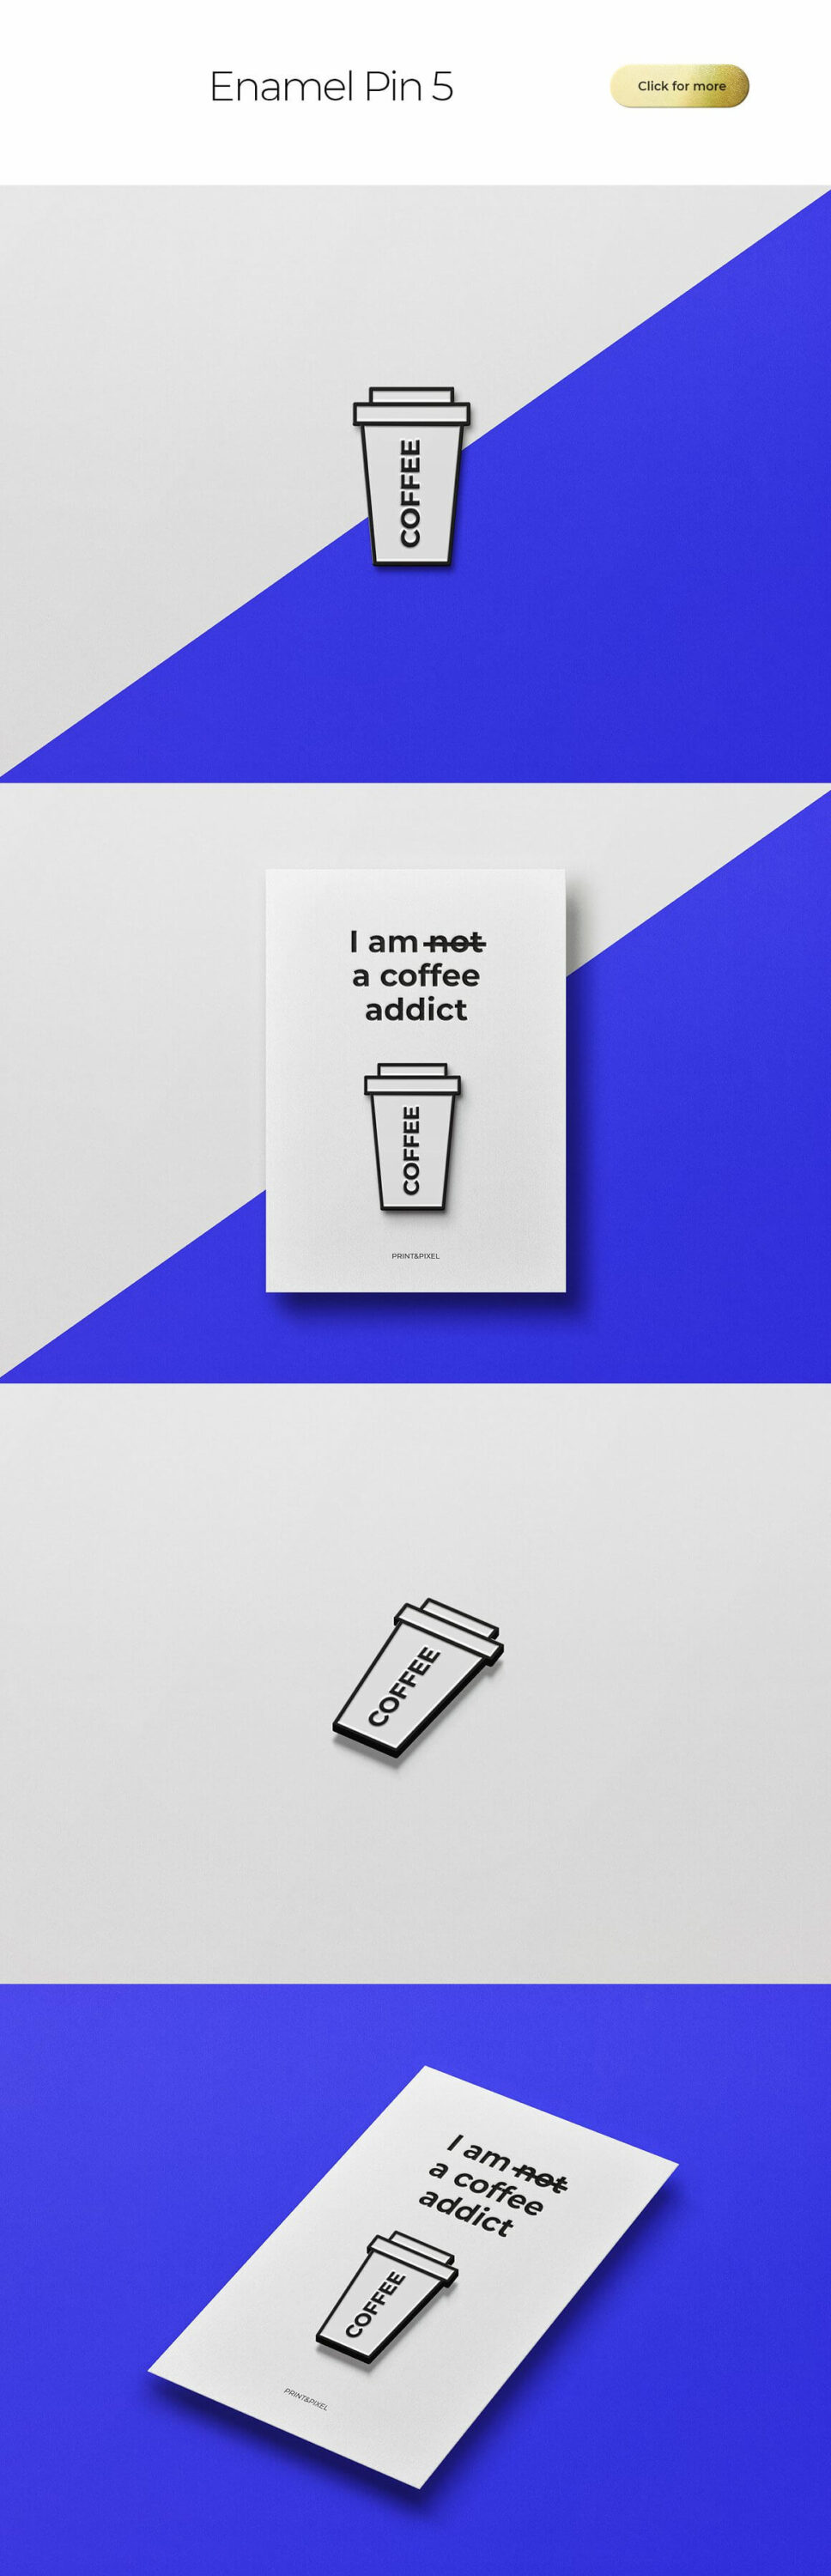 Image with glass of coffee and inscription "I am a coffee addict" on the blue and white backgrounds.